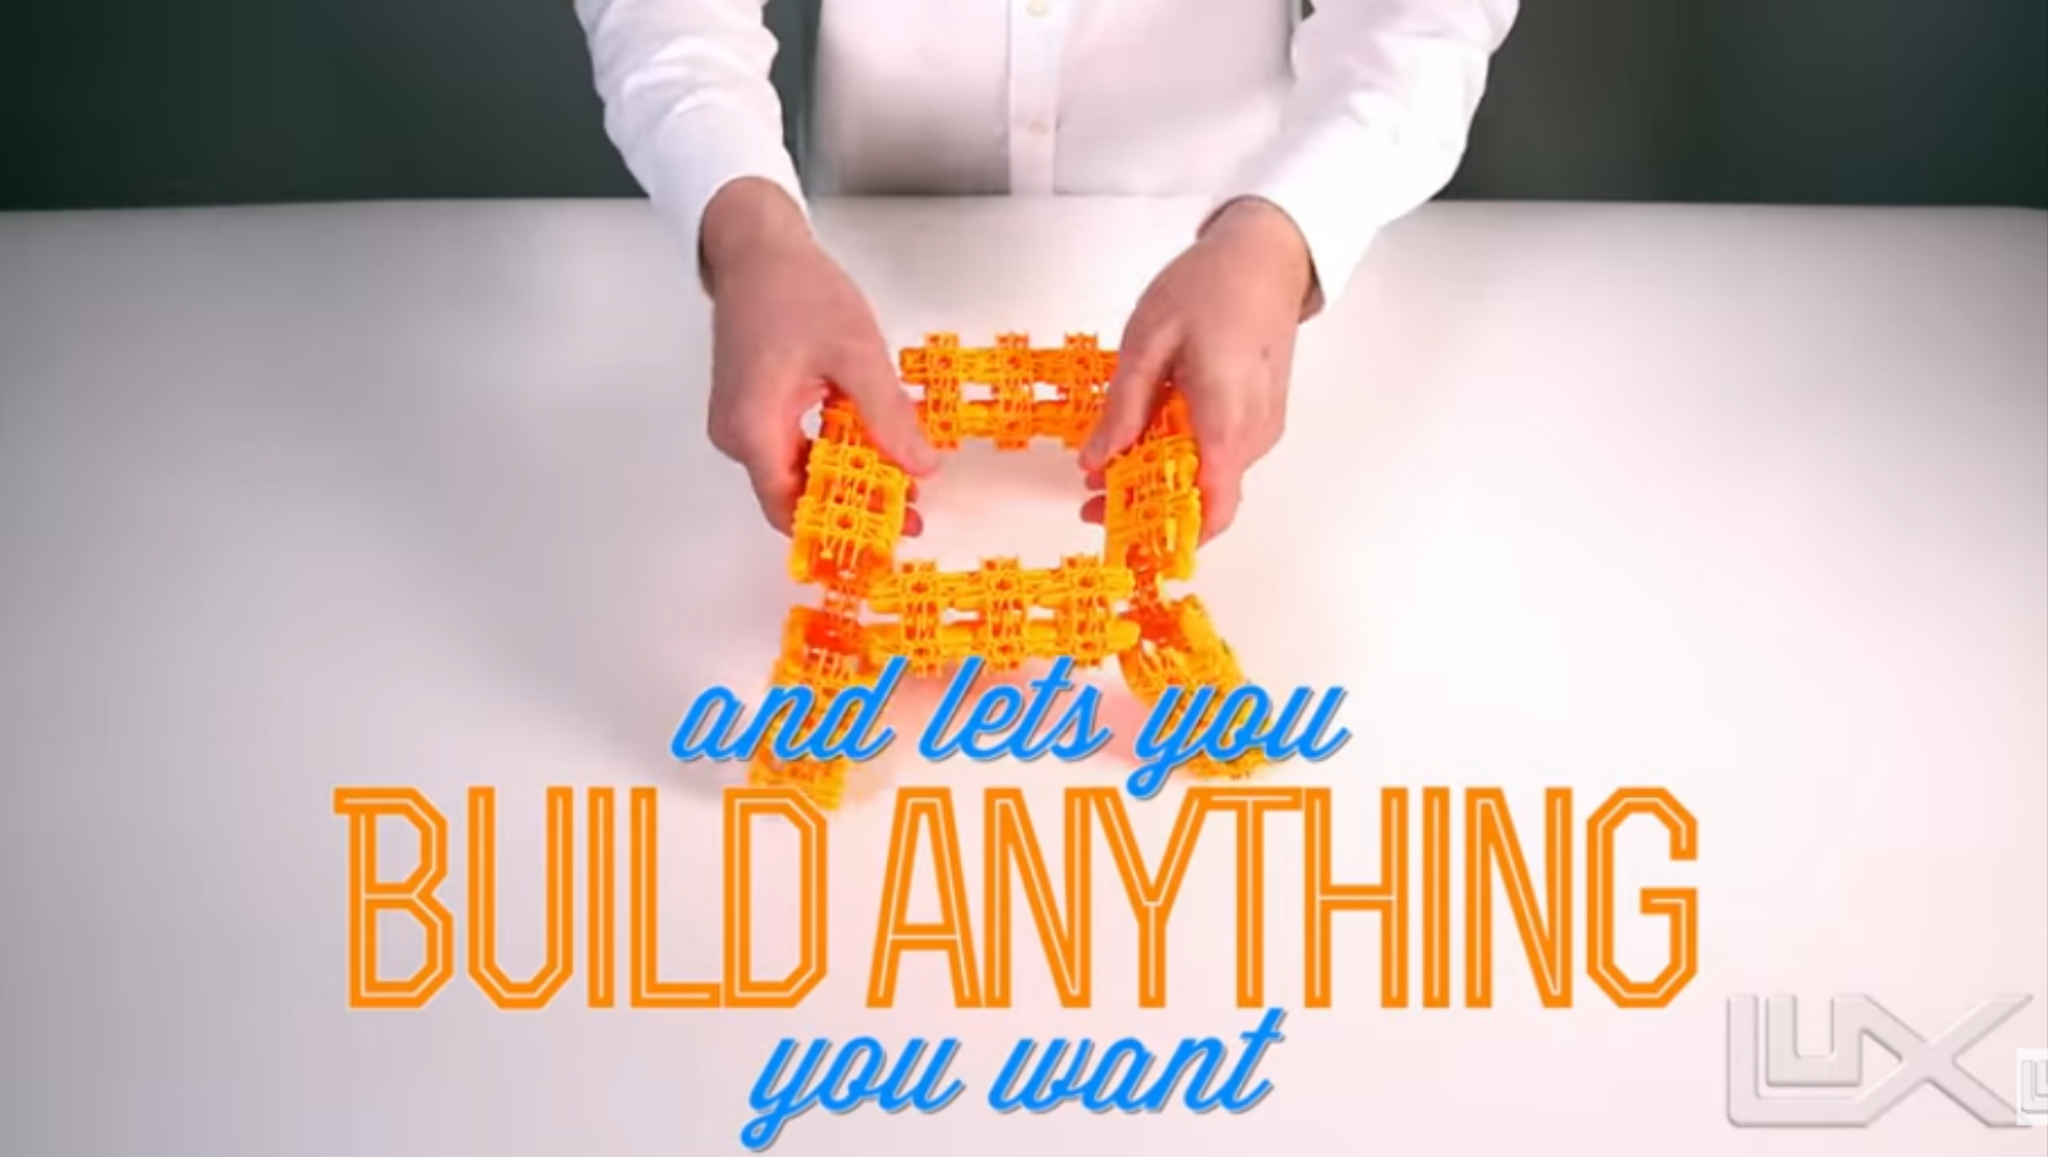 LUX BLOX - The Build ANYTHING Learning Construction Toy!